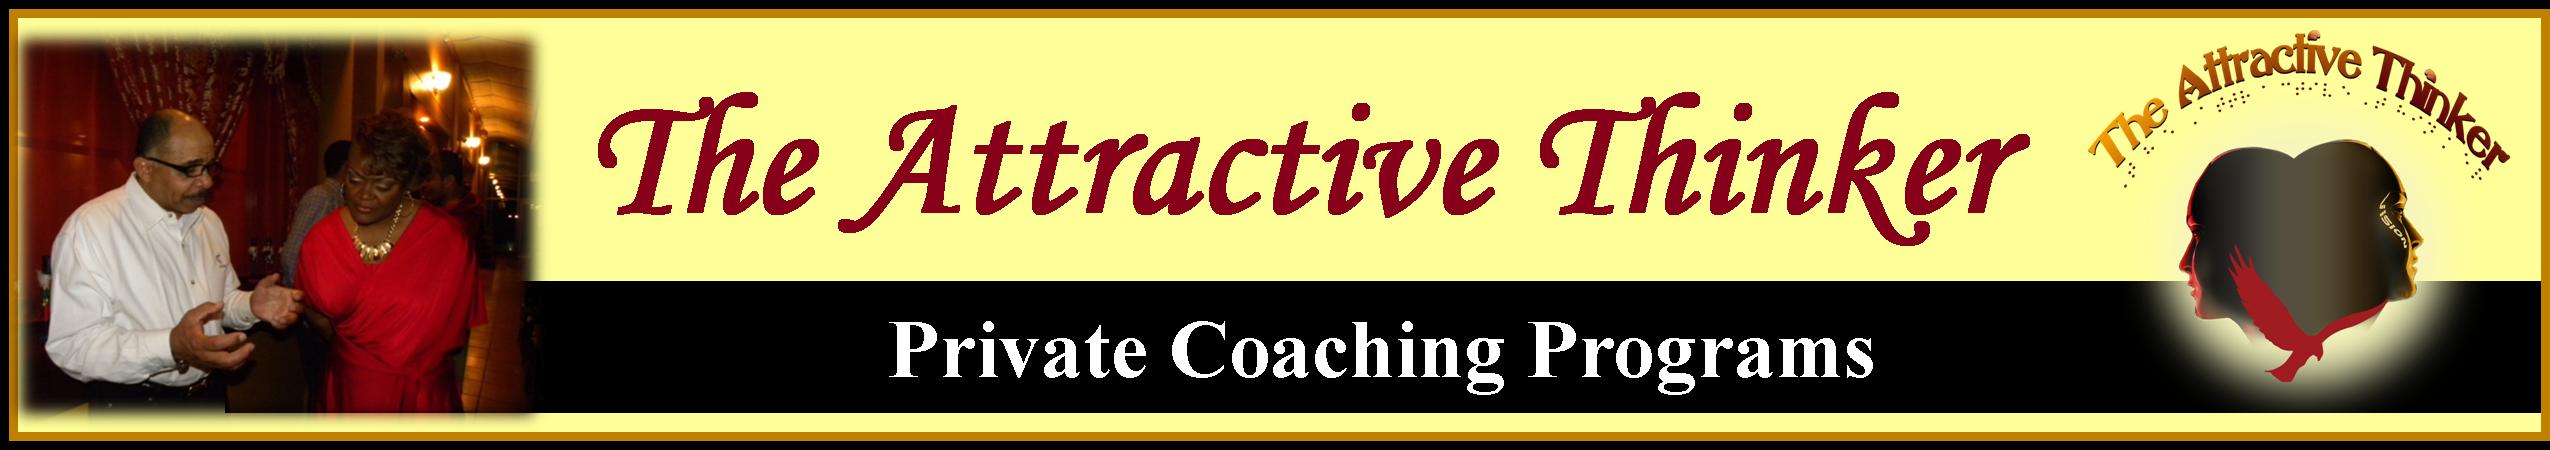 The Attractive Thinker Private Coaching Programs banner